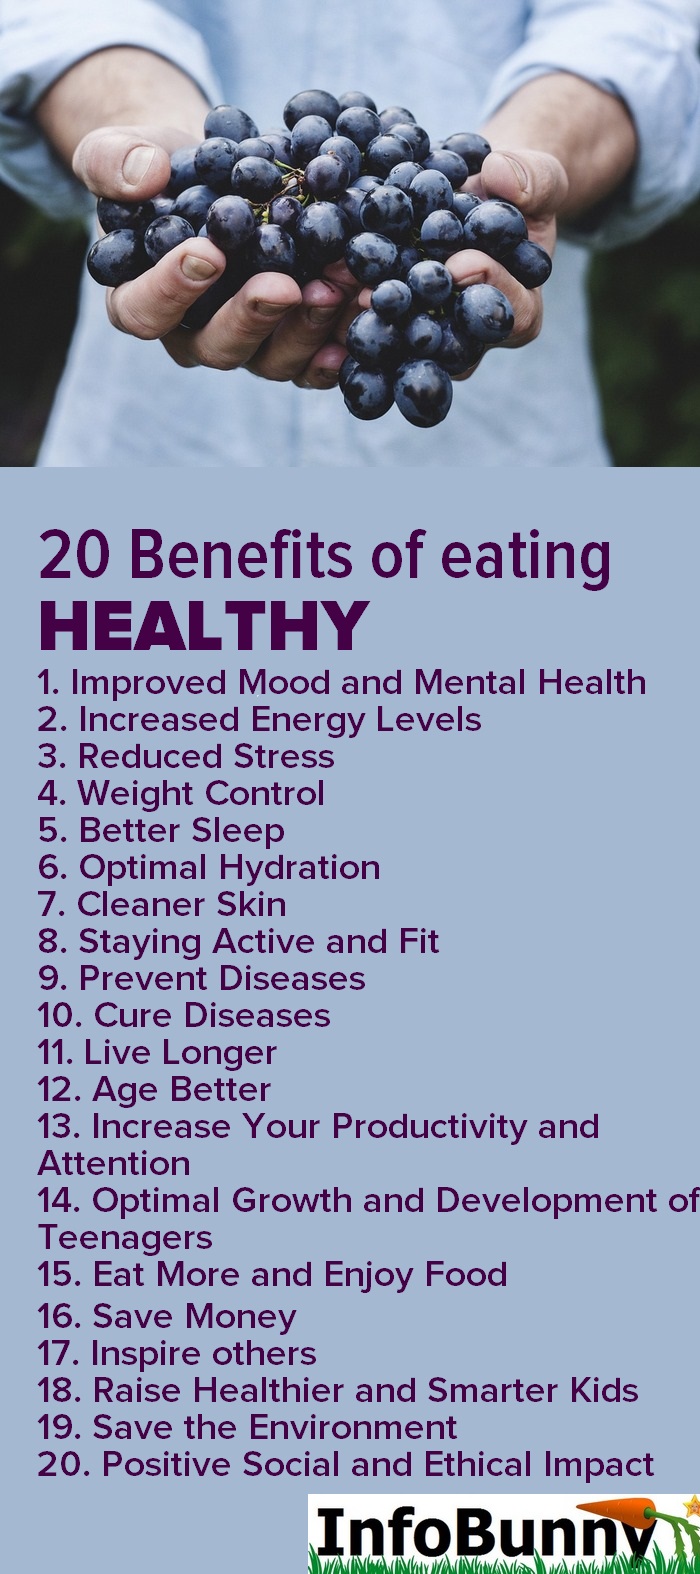 Pniterest image for Benefits of healthy eating